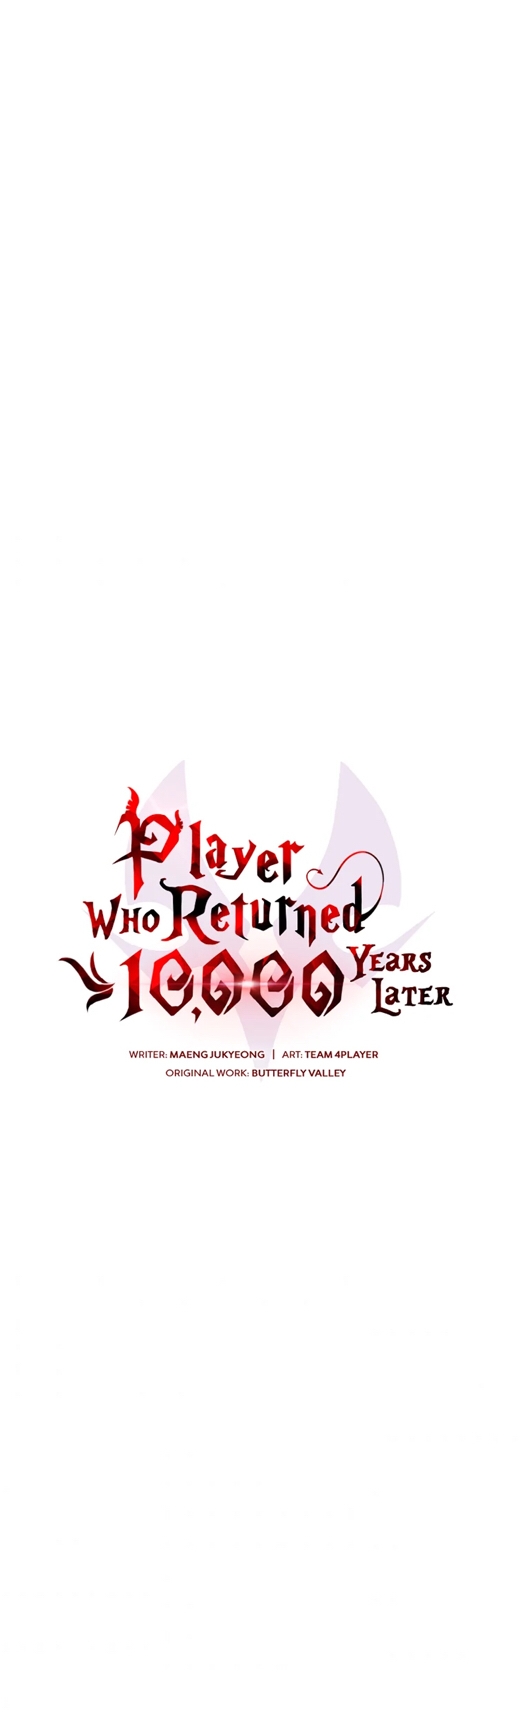 Player-Who-Returned-10000-Years-Later-5-21.jpg